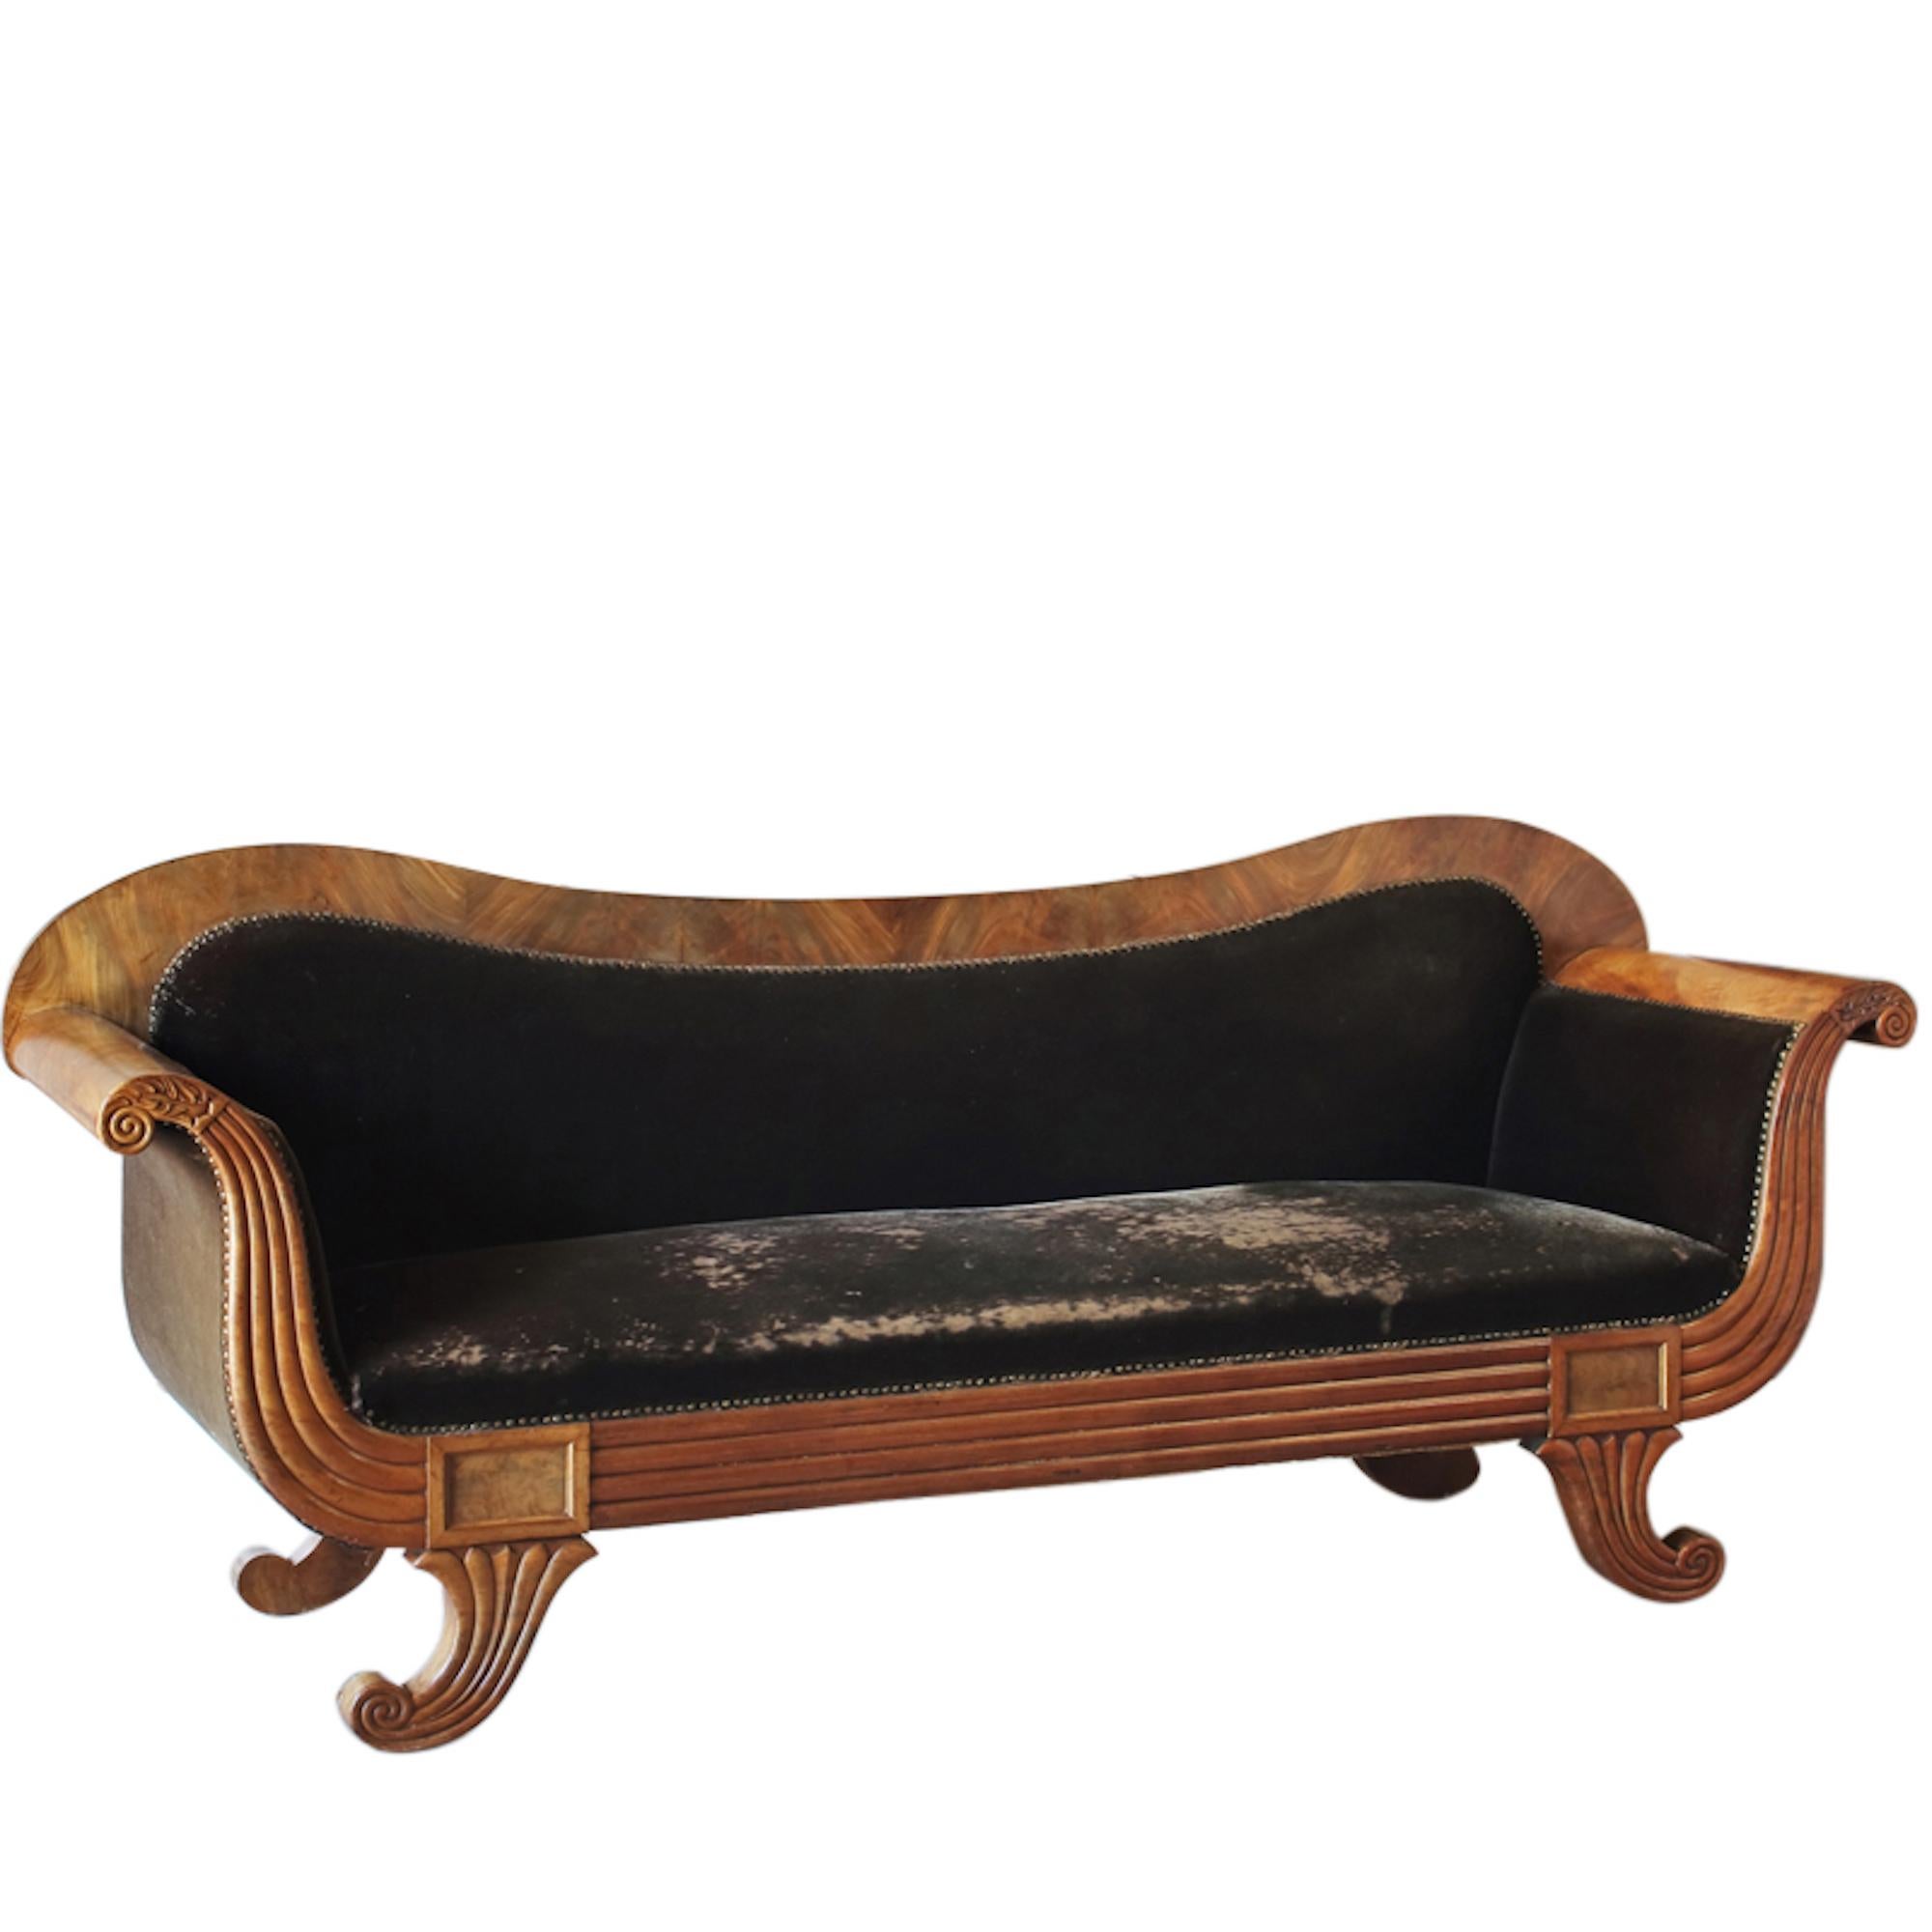 19th Century French Empire Style Double Ended Mahogany Sofa For Sale 5